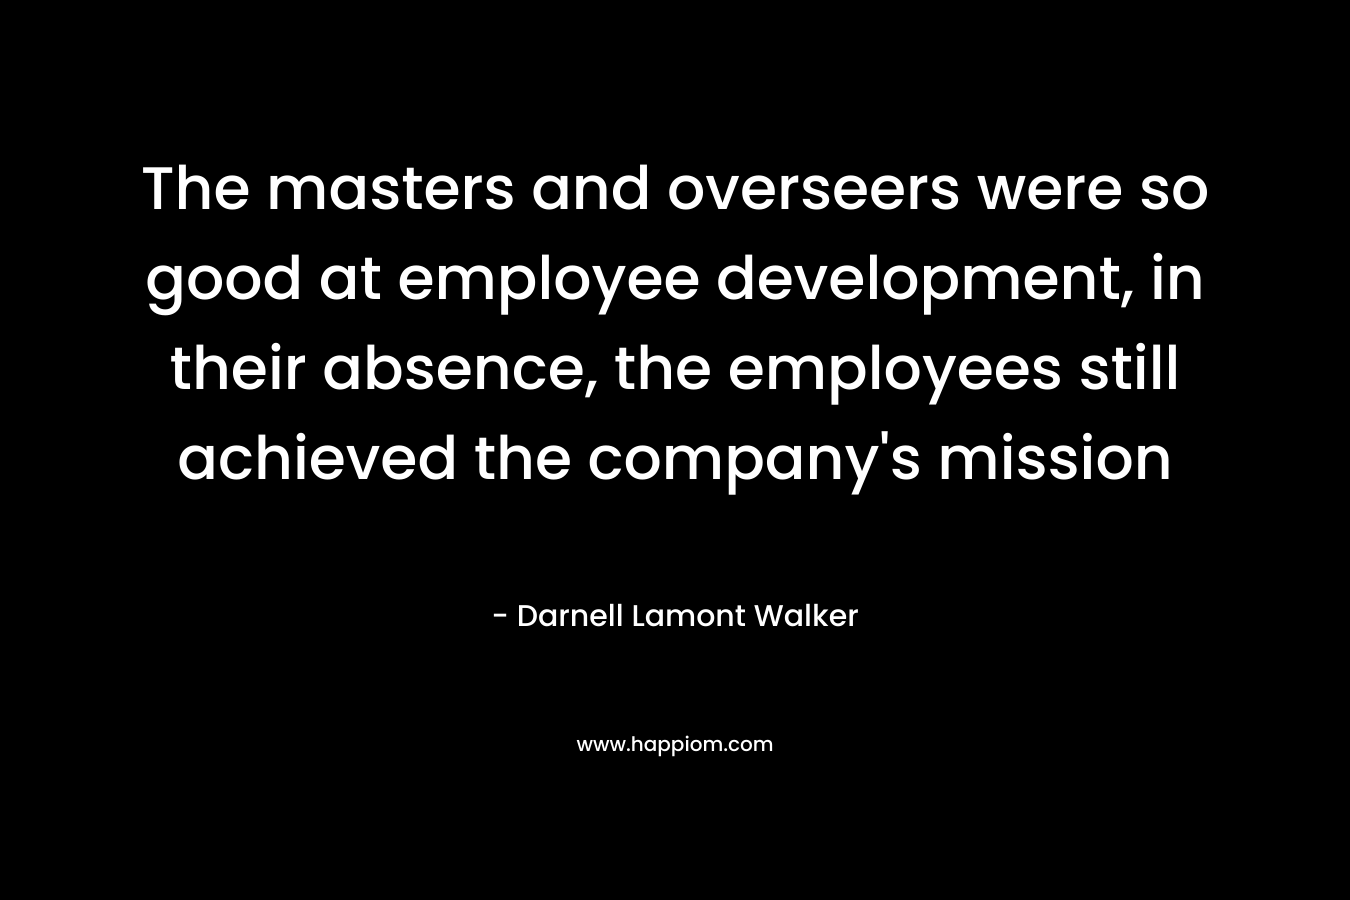 The masters and overseers were so good at employee development, in their absence, the employees still achieved the company’s mission – Darnell Lamont Walker